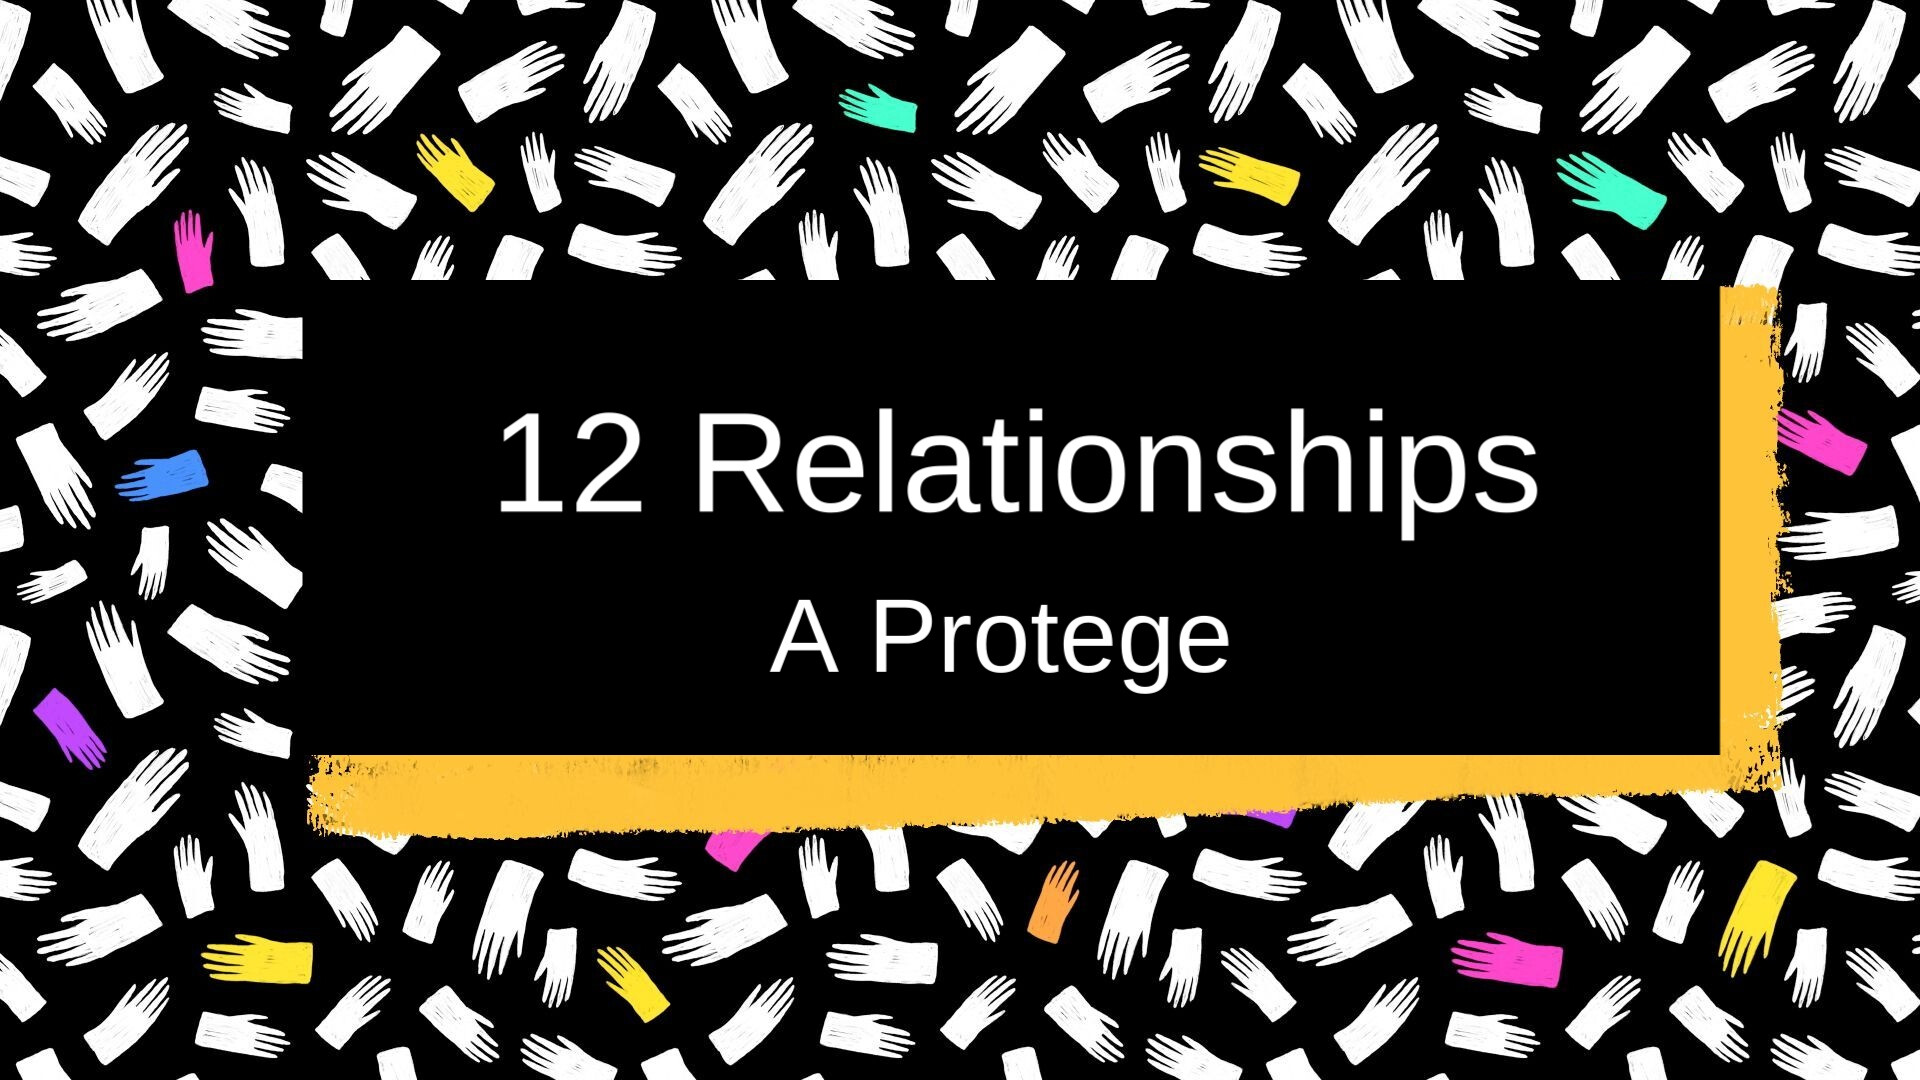 12 Relationships: A Protege